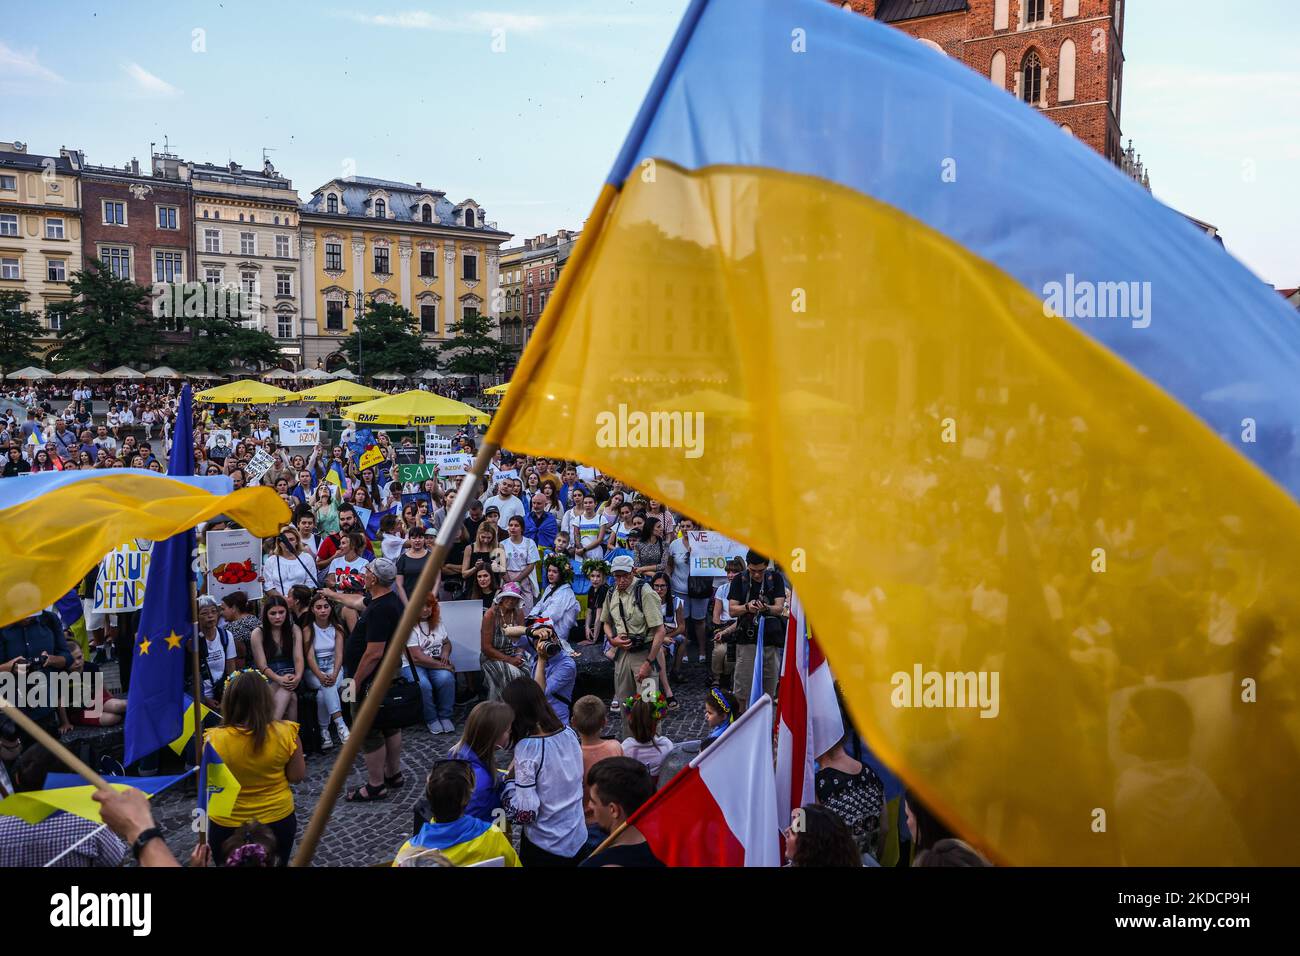 Ukrainians and Poles attend demonstration at the Main Square in support of Azovstal 4308 regiment defenders that are currently in Russian captivity. Krakow, Poland on June 25th, 2022. Peaceful rallies were held around the world in support of more than 2,500 Azovstal prisoners of war. The Azov Regiment was among the Ukrainian units that defended the steelworks in the city of Mariupol for nearly three months before surrendering in May under relentless Russian attacks from the ground, sea and air. (Photo by Beata Zawrzel/NurPhoto) Stock Photo